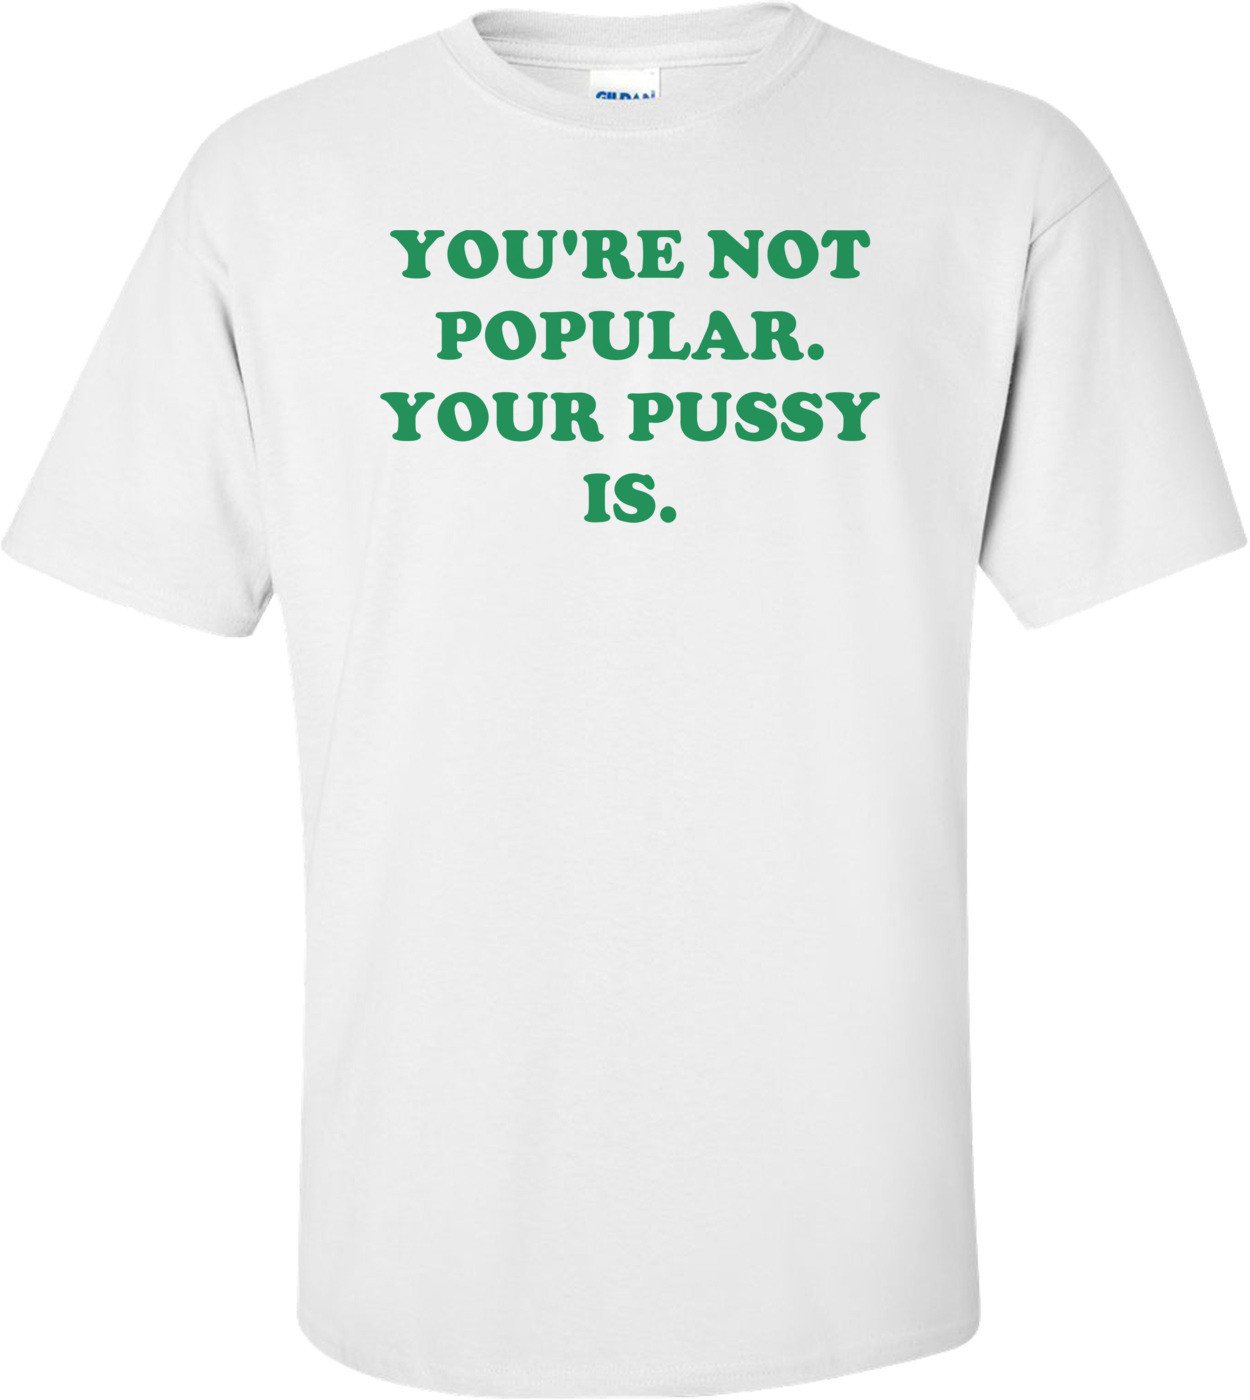 YOU'RE NOT POPULAR. YOUR PUSSY IS. Shirt